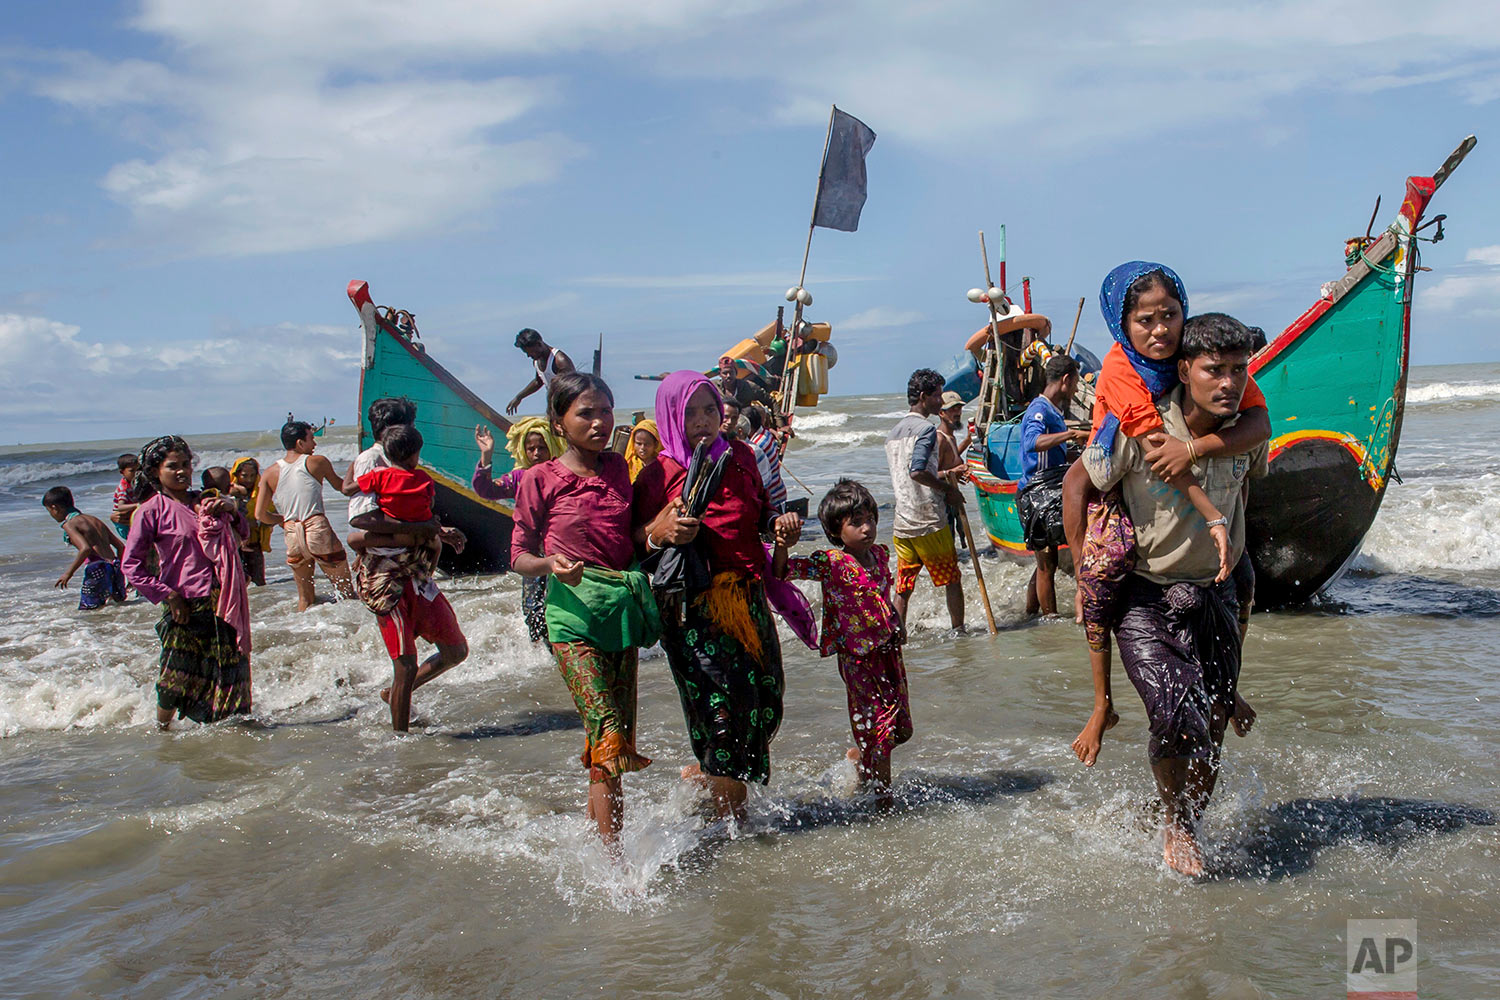  Rohingya Muslims walk to the shore after arriving on a boat from Myanmar to Bangladesh in Shah Porir Dwip, Bangladesh, Thursday, Sept. 14, 2017. Nearly three weeks into a mass exodus of Rohingya fleeing violence in Myanmar, thousands were still floo